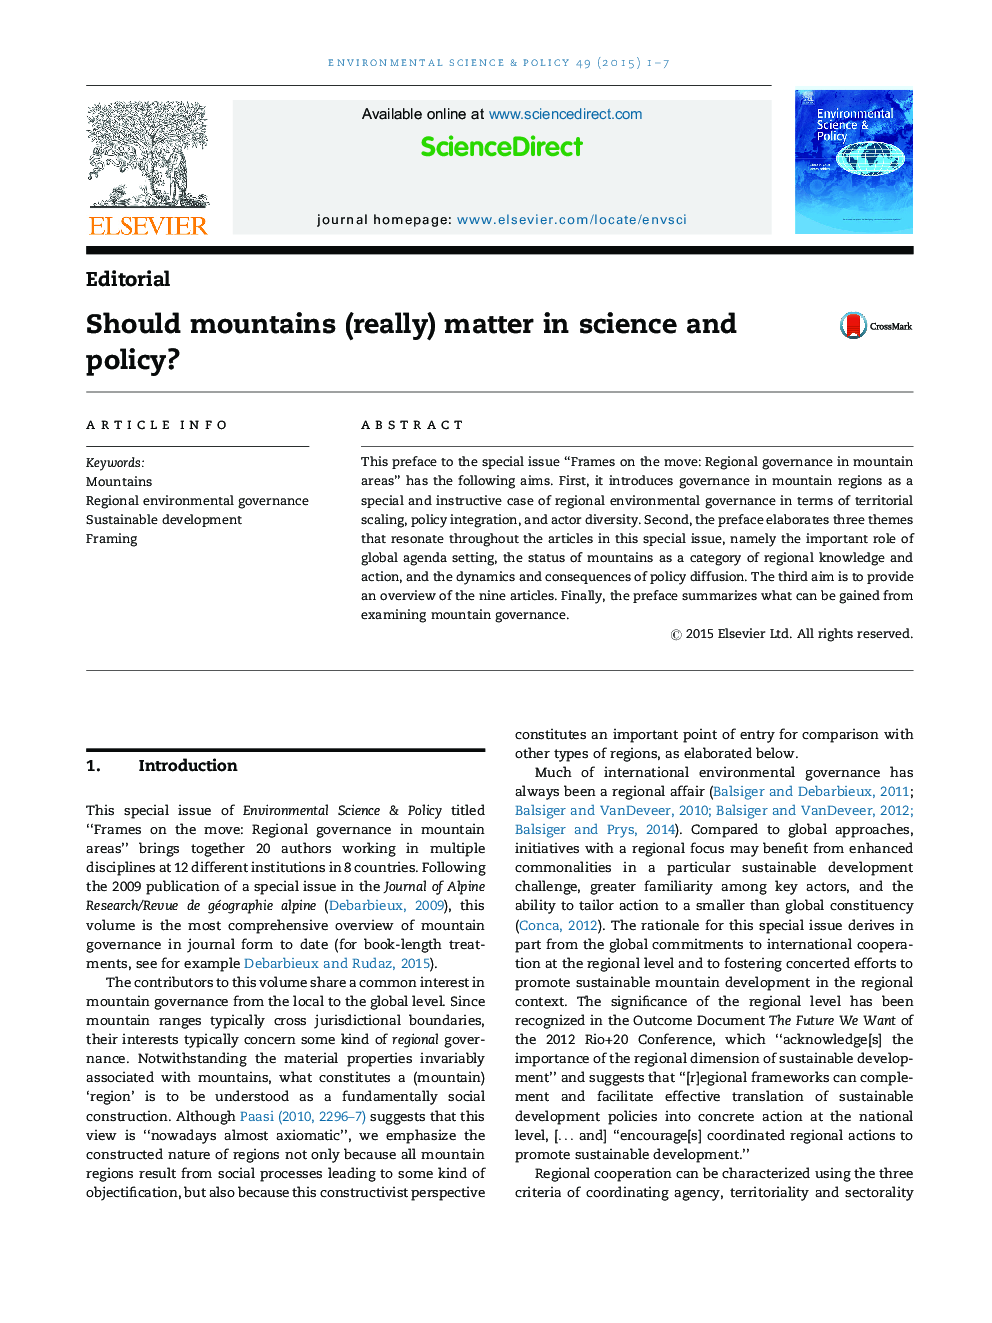 Should mountains (really) matter in science and policy?